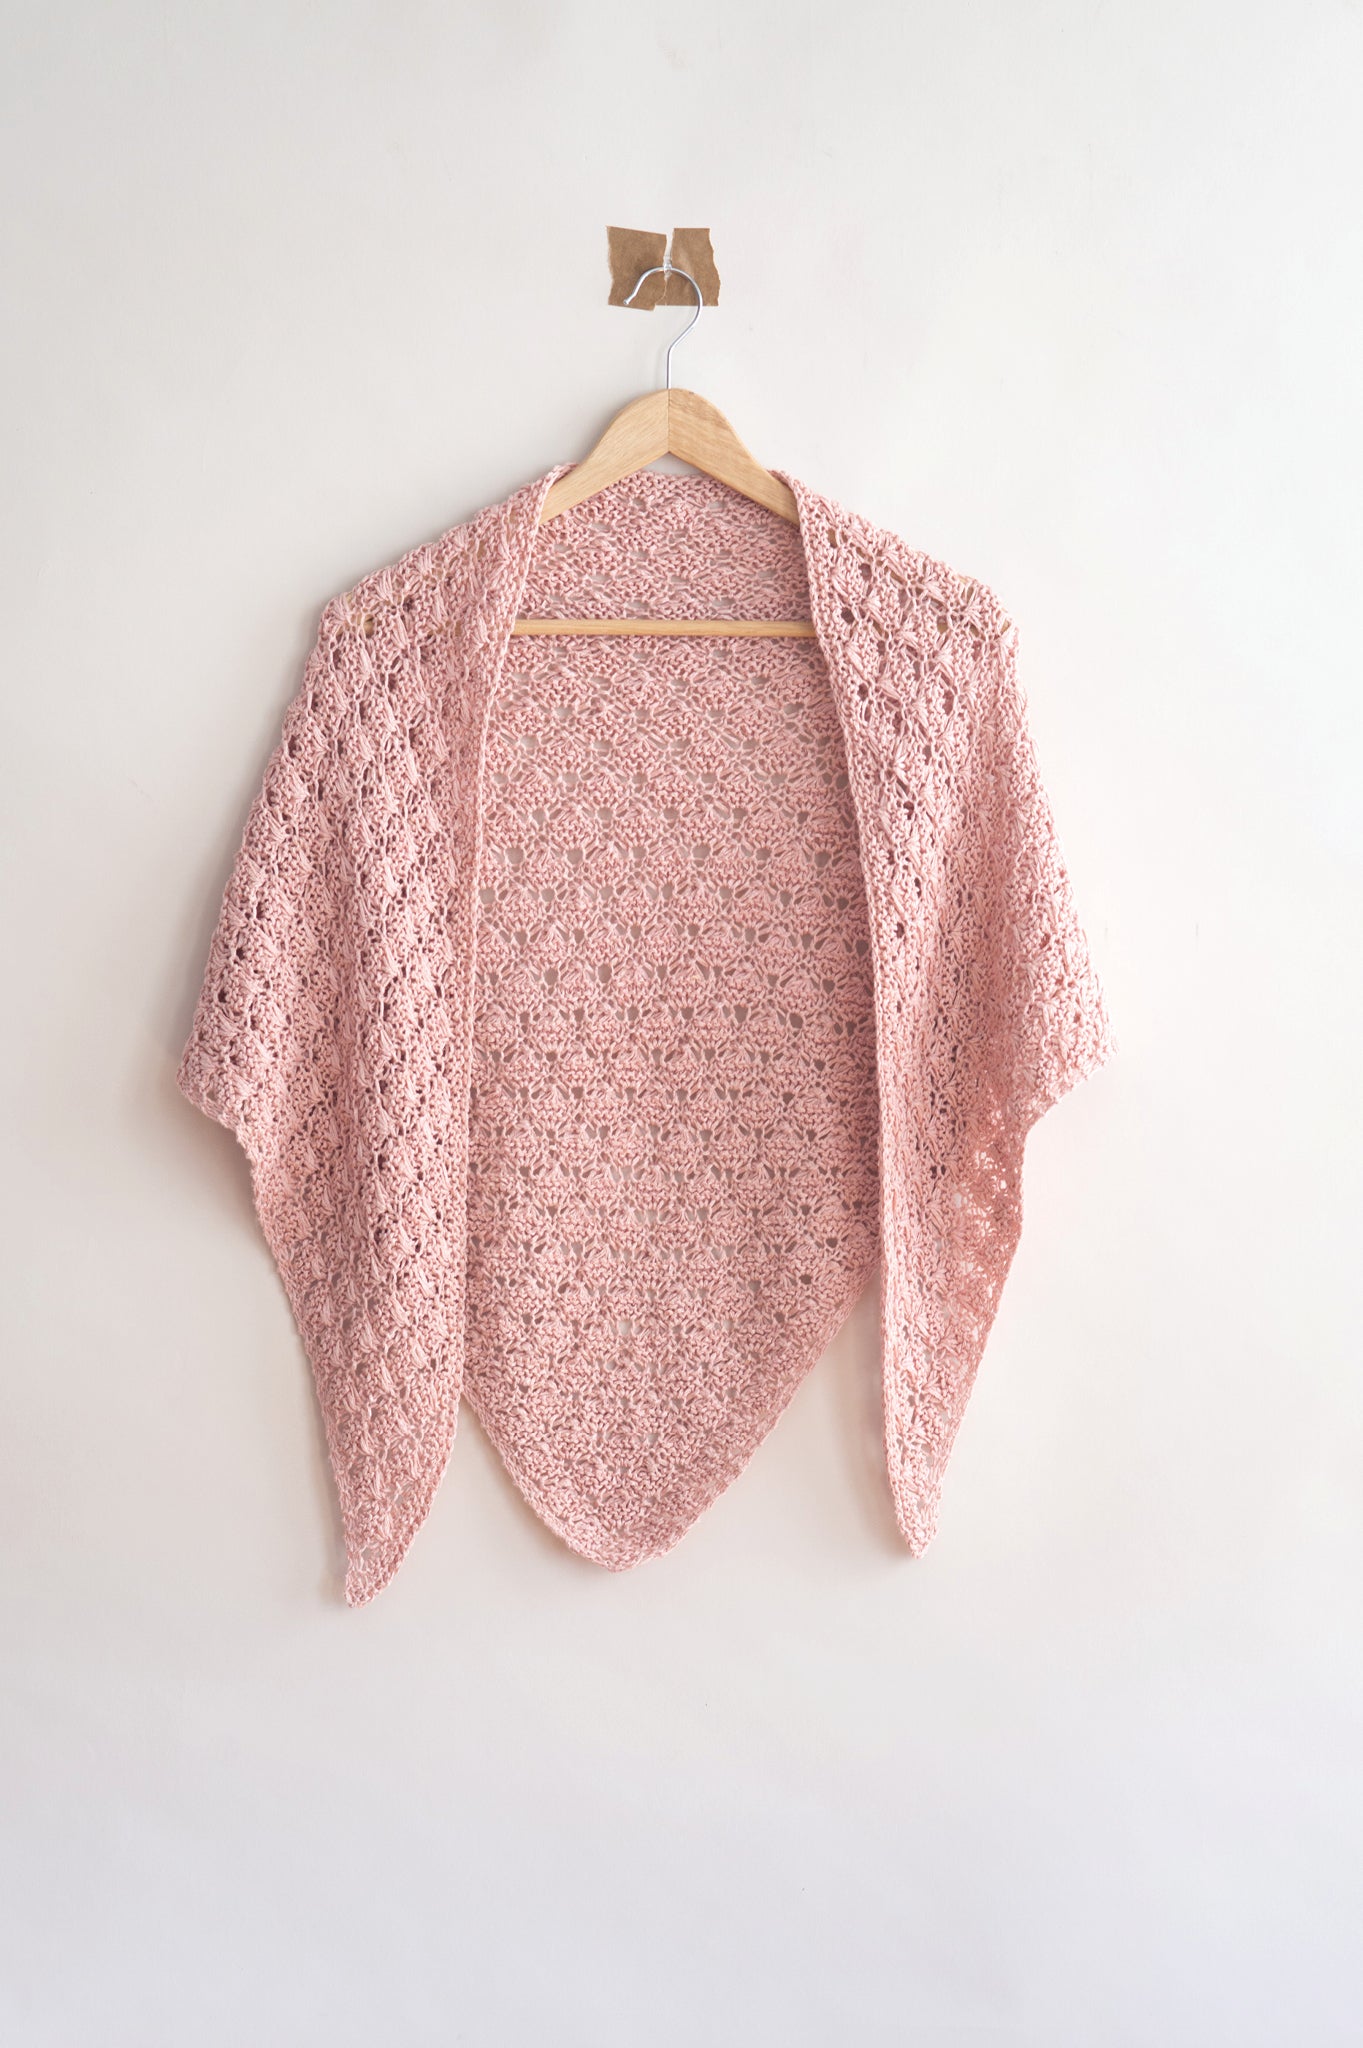 higgins shawl knitting pattern – Quince & Co.